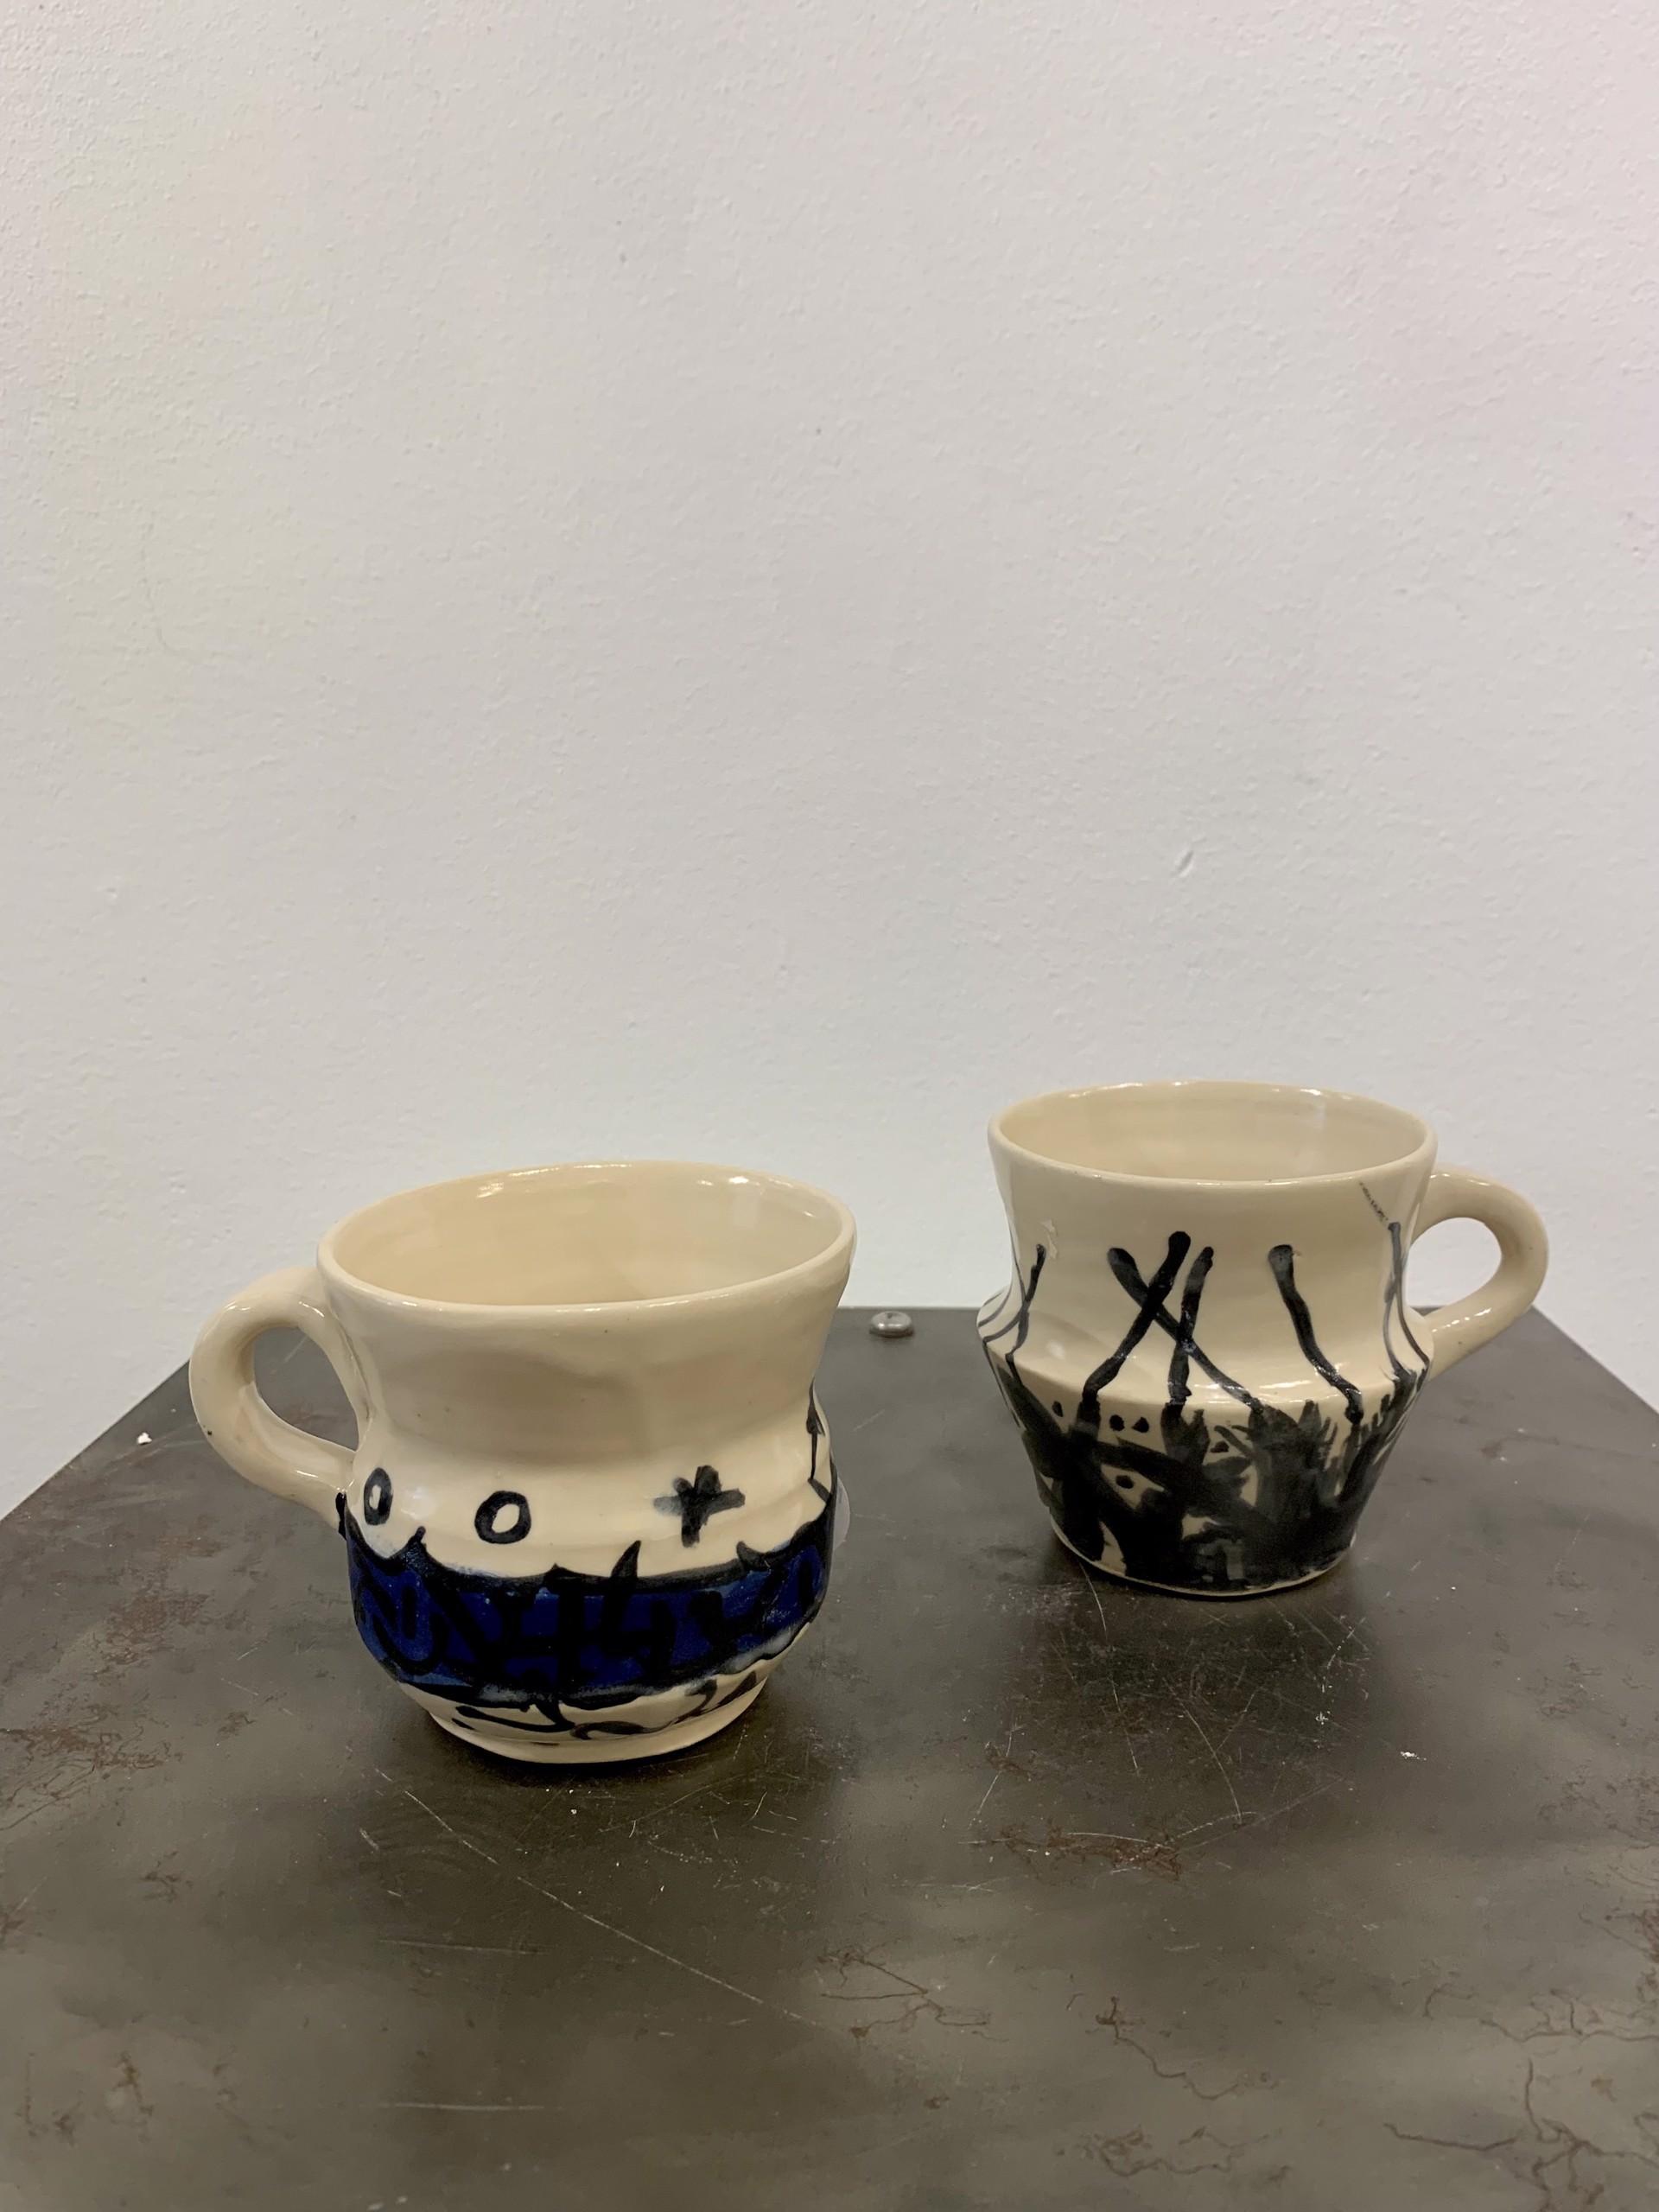 Mugs (various sizes and colors) by Renato Abbate and Anne McCombie